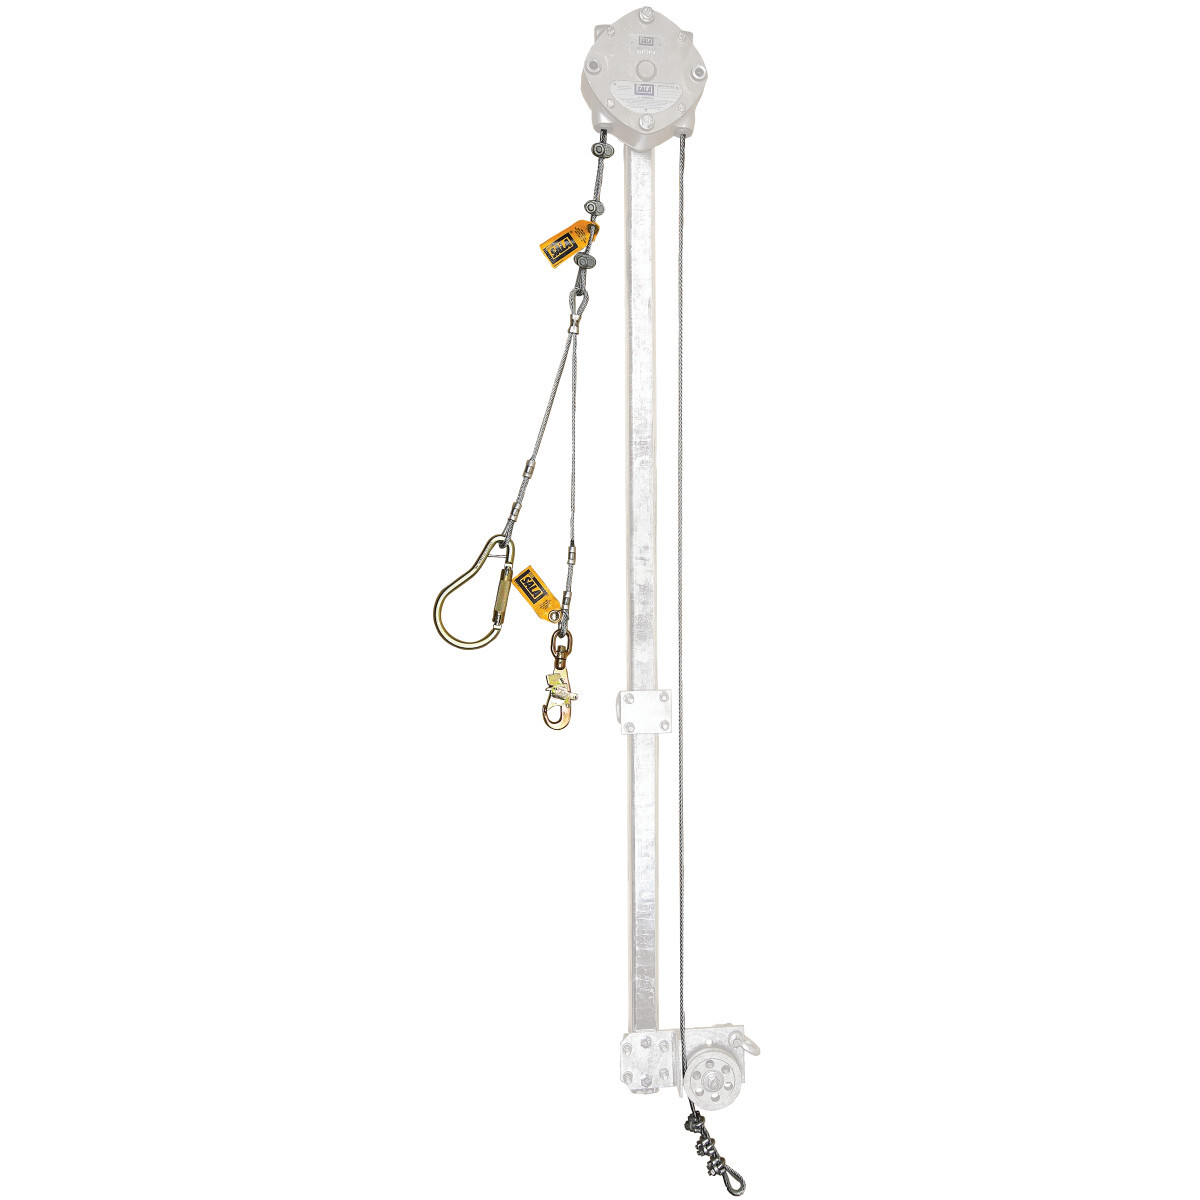 3M™ DBI-SALA® 150' Galvanized Steel Cable Assembly With Rung And Harness Hook Connections (For Use With SSB Series Climb Assist